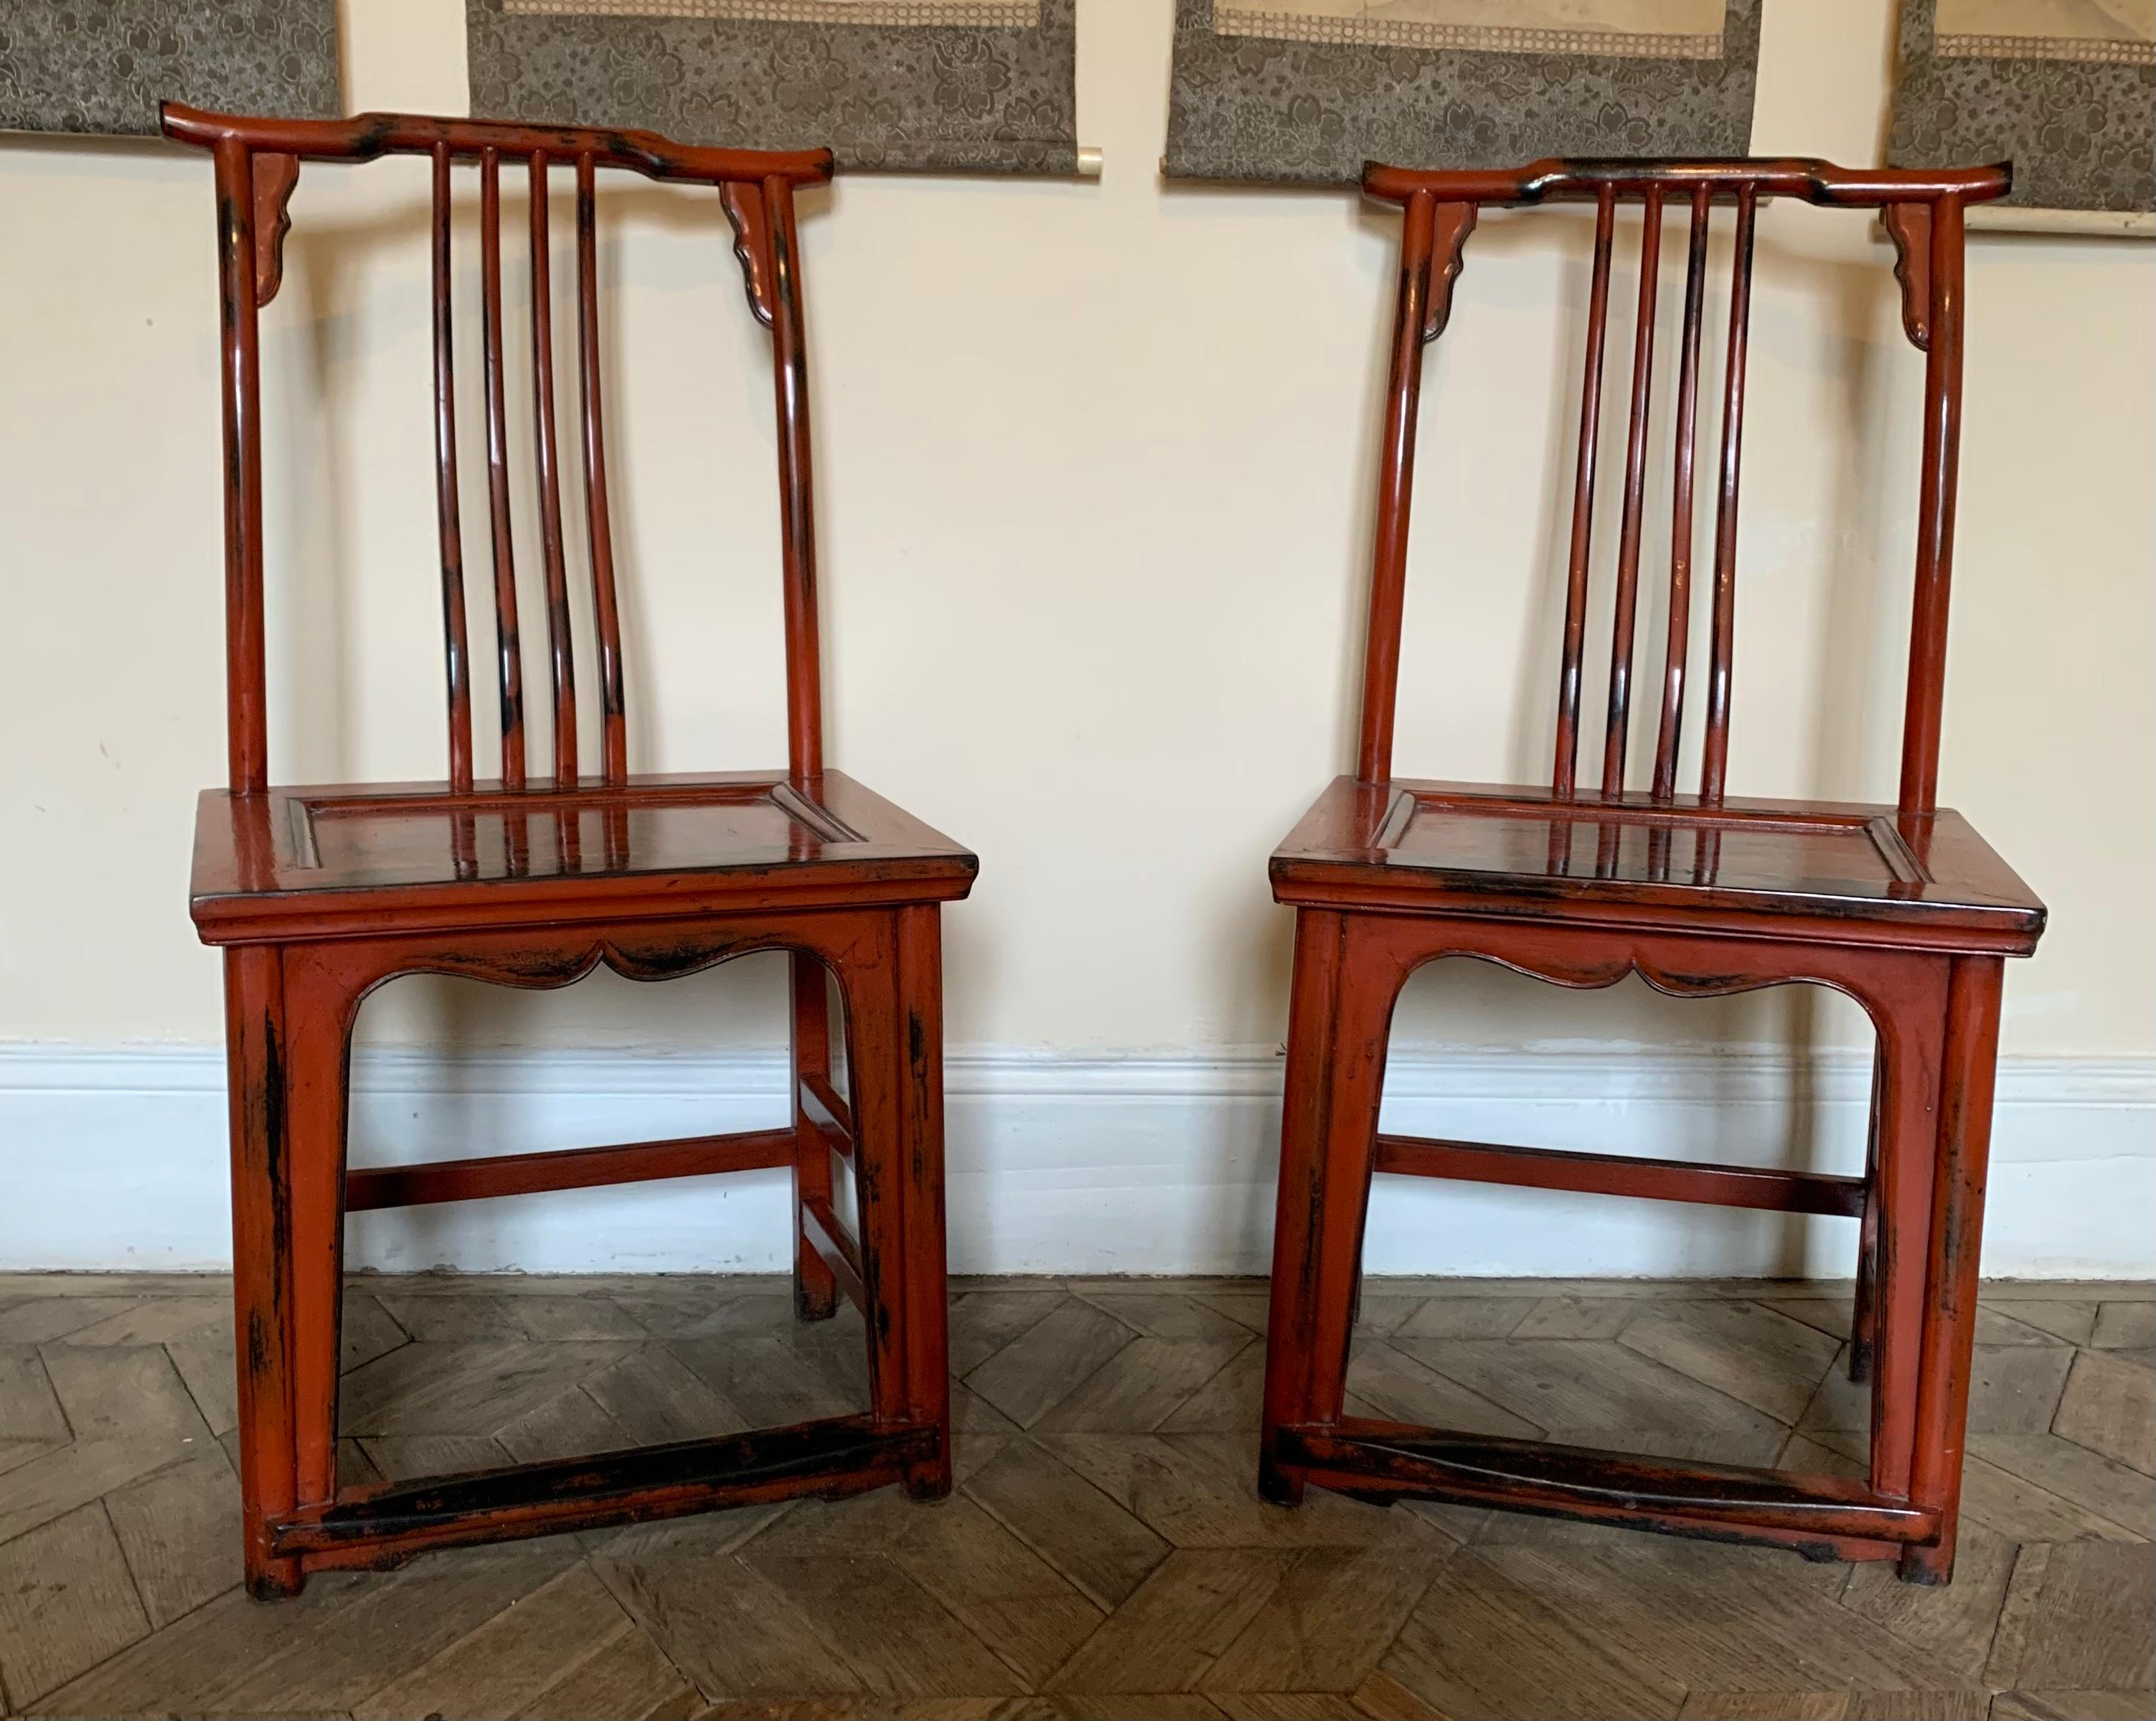 Charming pair of Chinese chairs in red lacquered wood. The back of the latter is reminiscent of the bonnet worn by the scholars. The very straight lines of the set give it a very design aspect, allowing it to be integrated in a modern interior.